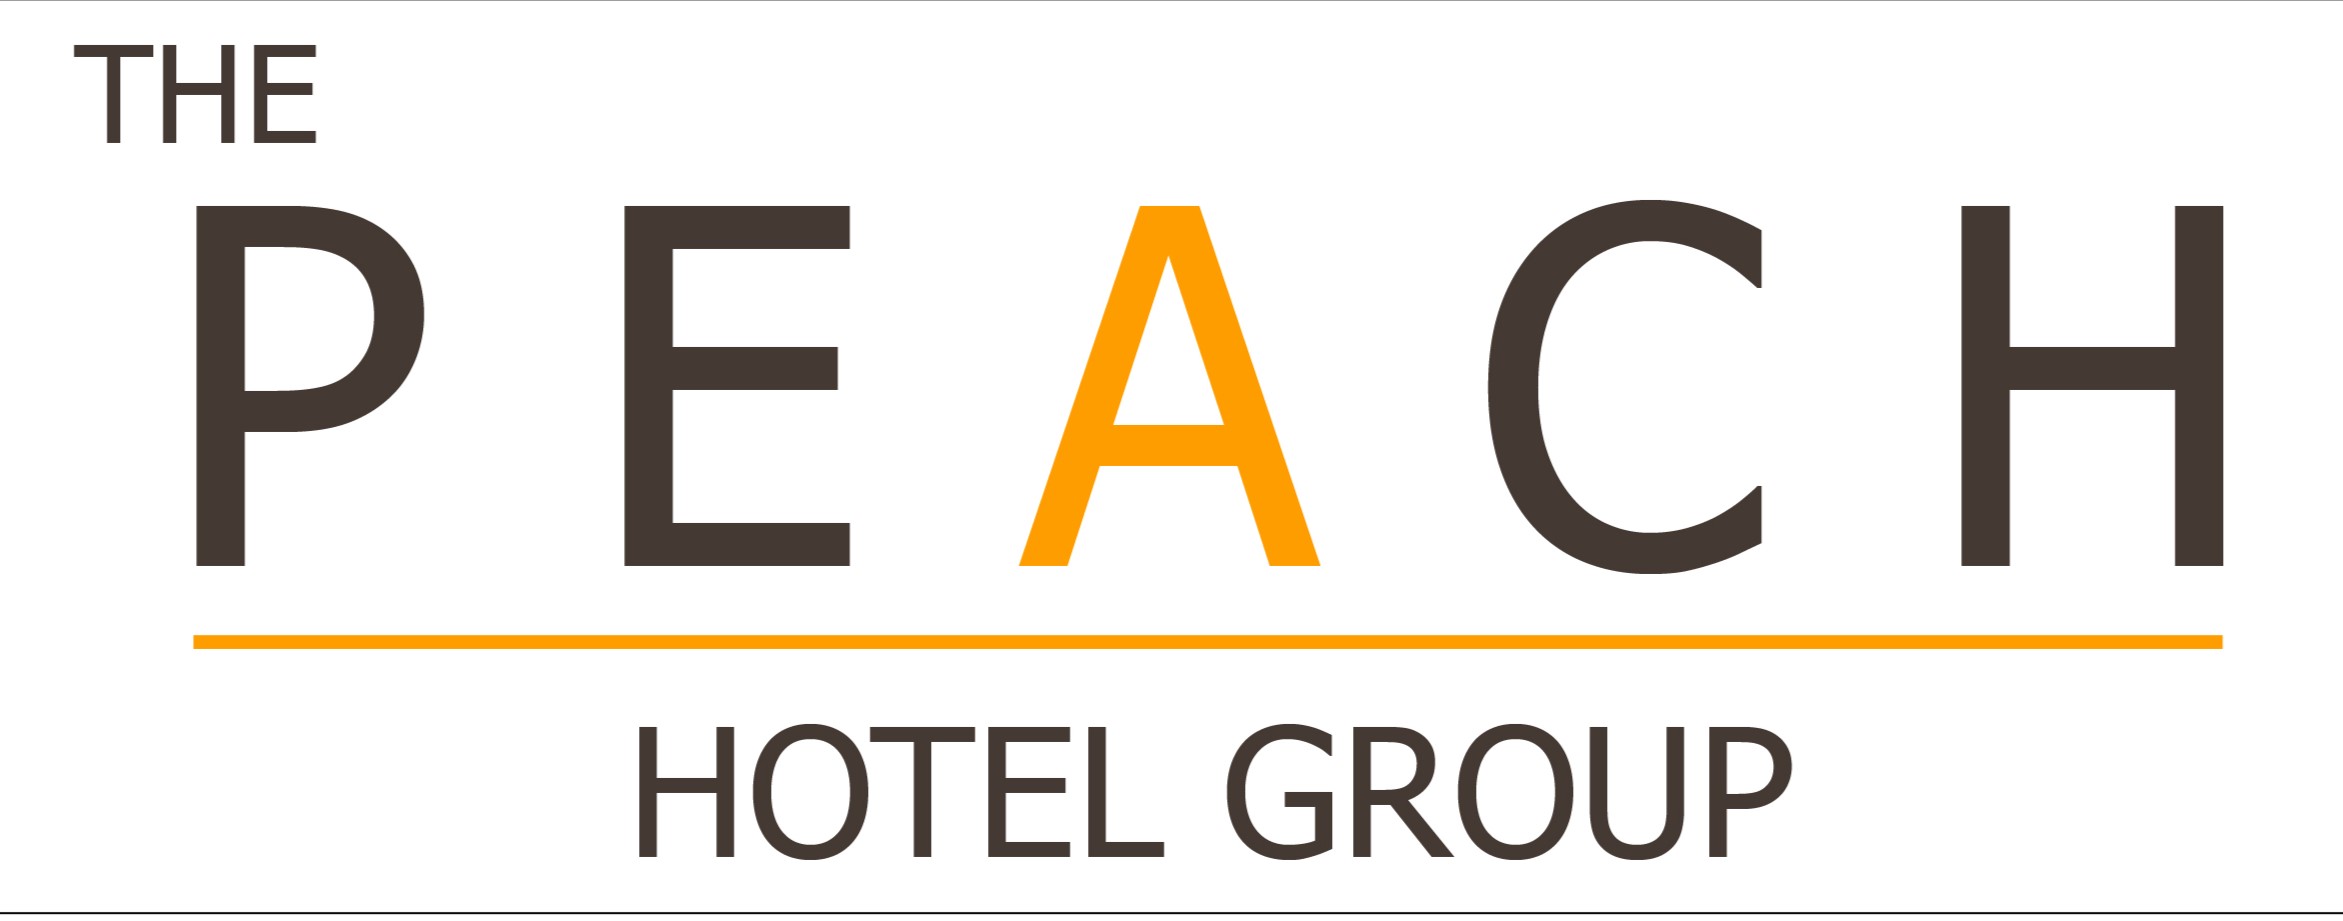 THE PEACH HOTEL GROUP COMPANY LIMITED